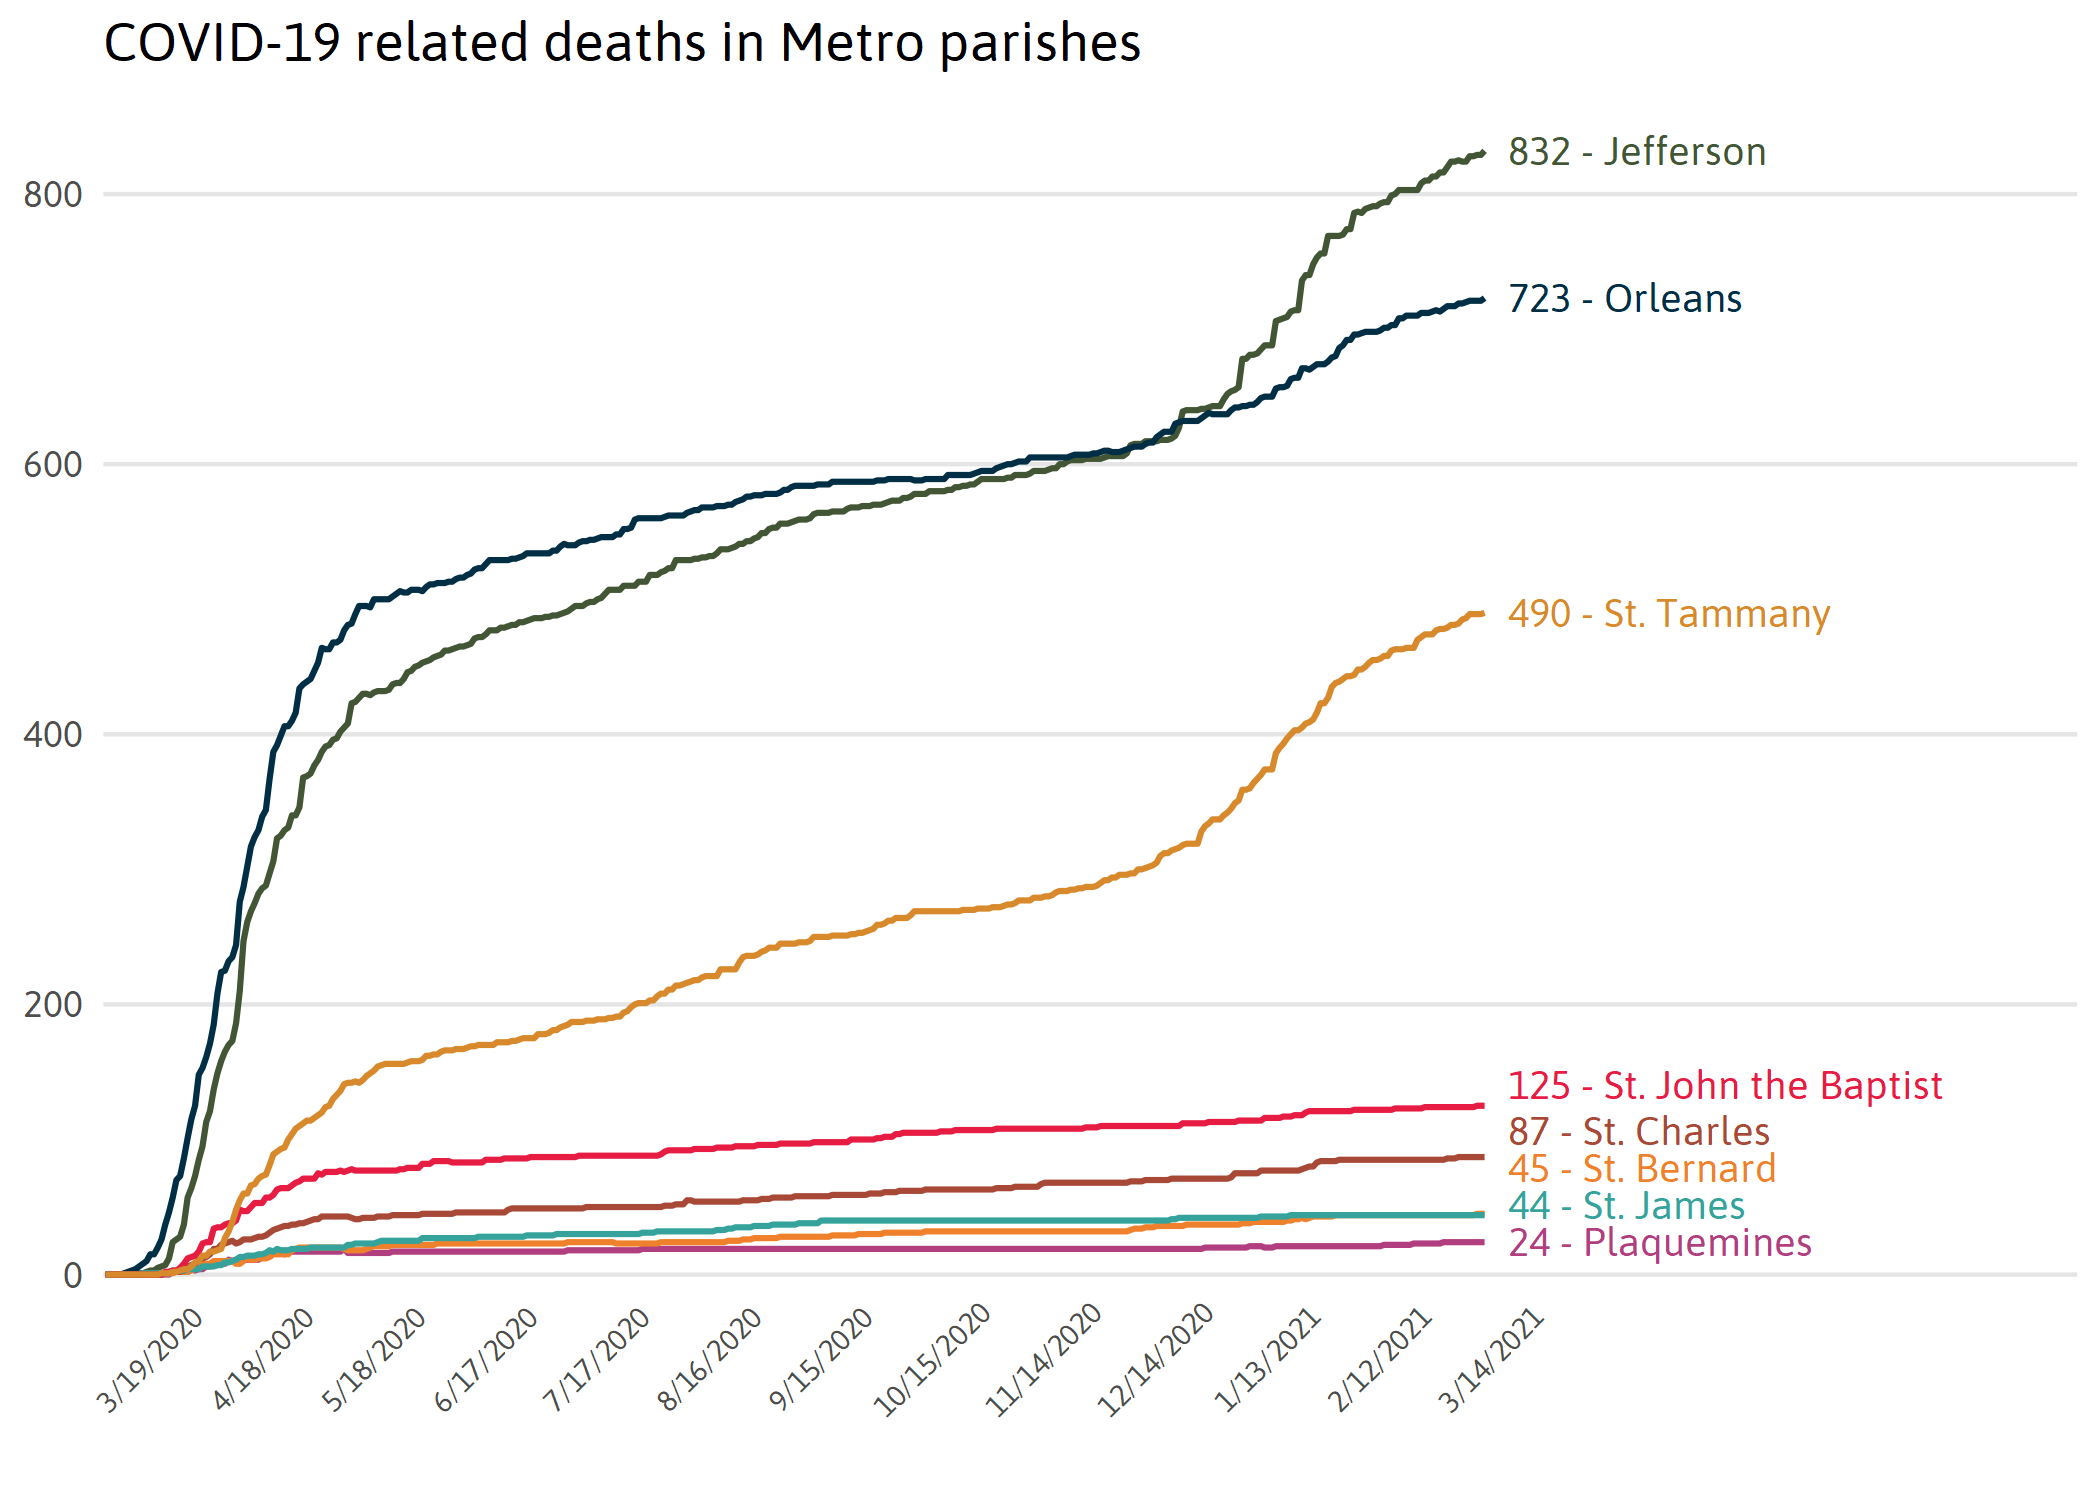 Deaths by Metro